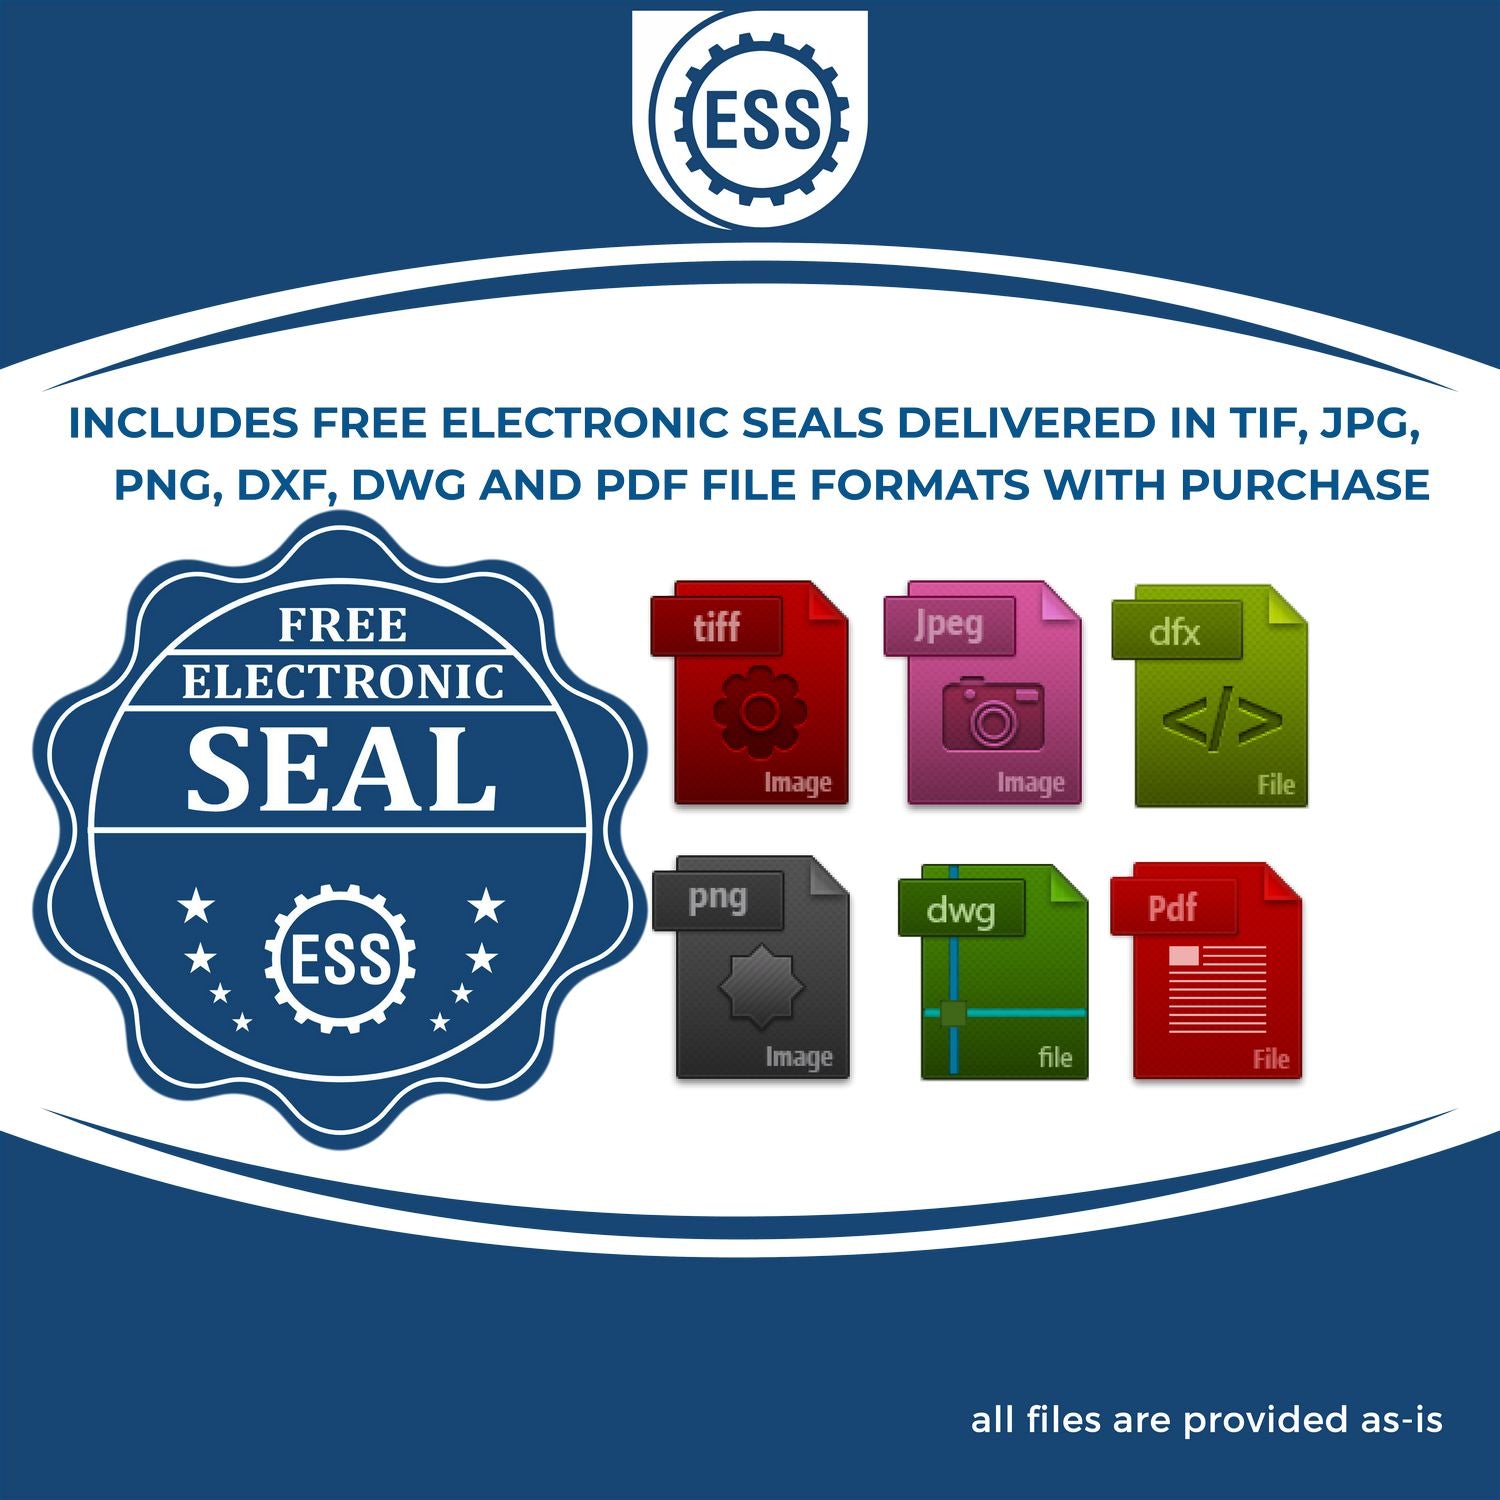 An infographic for the free electronic seal for the Premium MaxLight Pre-Inked Puerto Rico Engineering Stamp illustrating the different file type icons such as DXF, DWG, TIF, JPG and PNG.